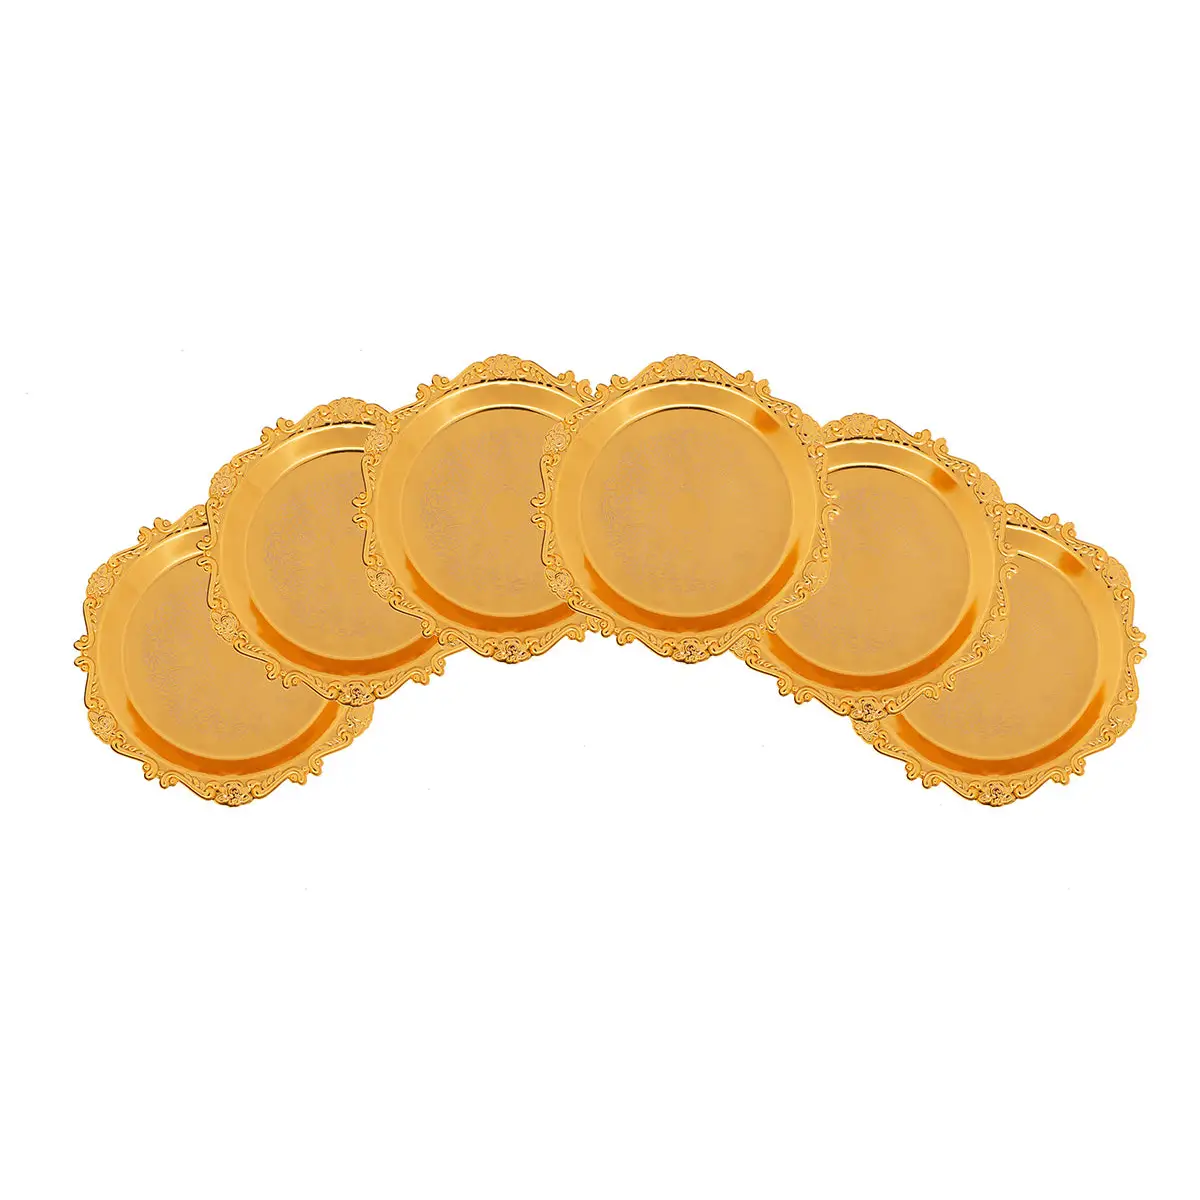 GOLD PLATED IRON COASTER RACK WITH 6 PCSCOASTERS. - LUXURY